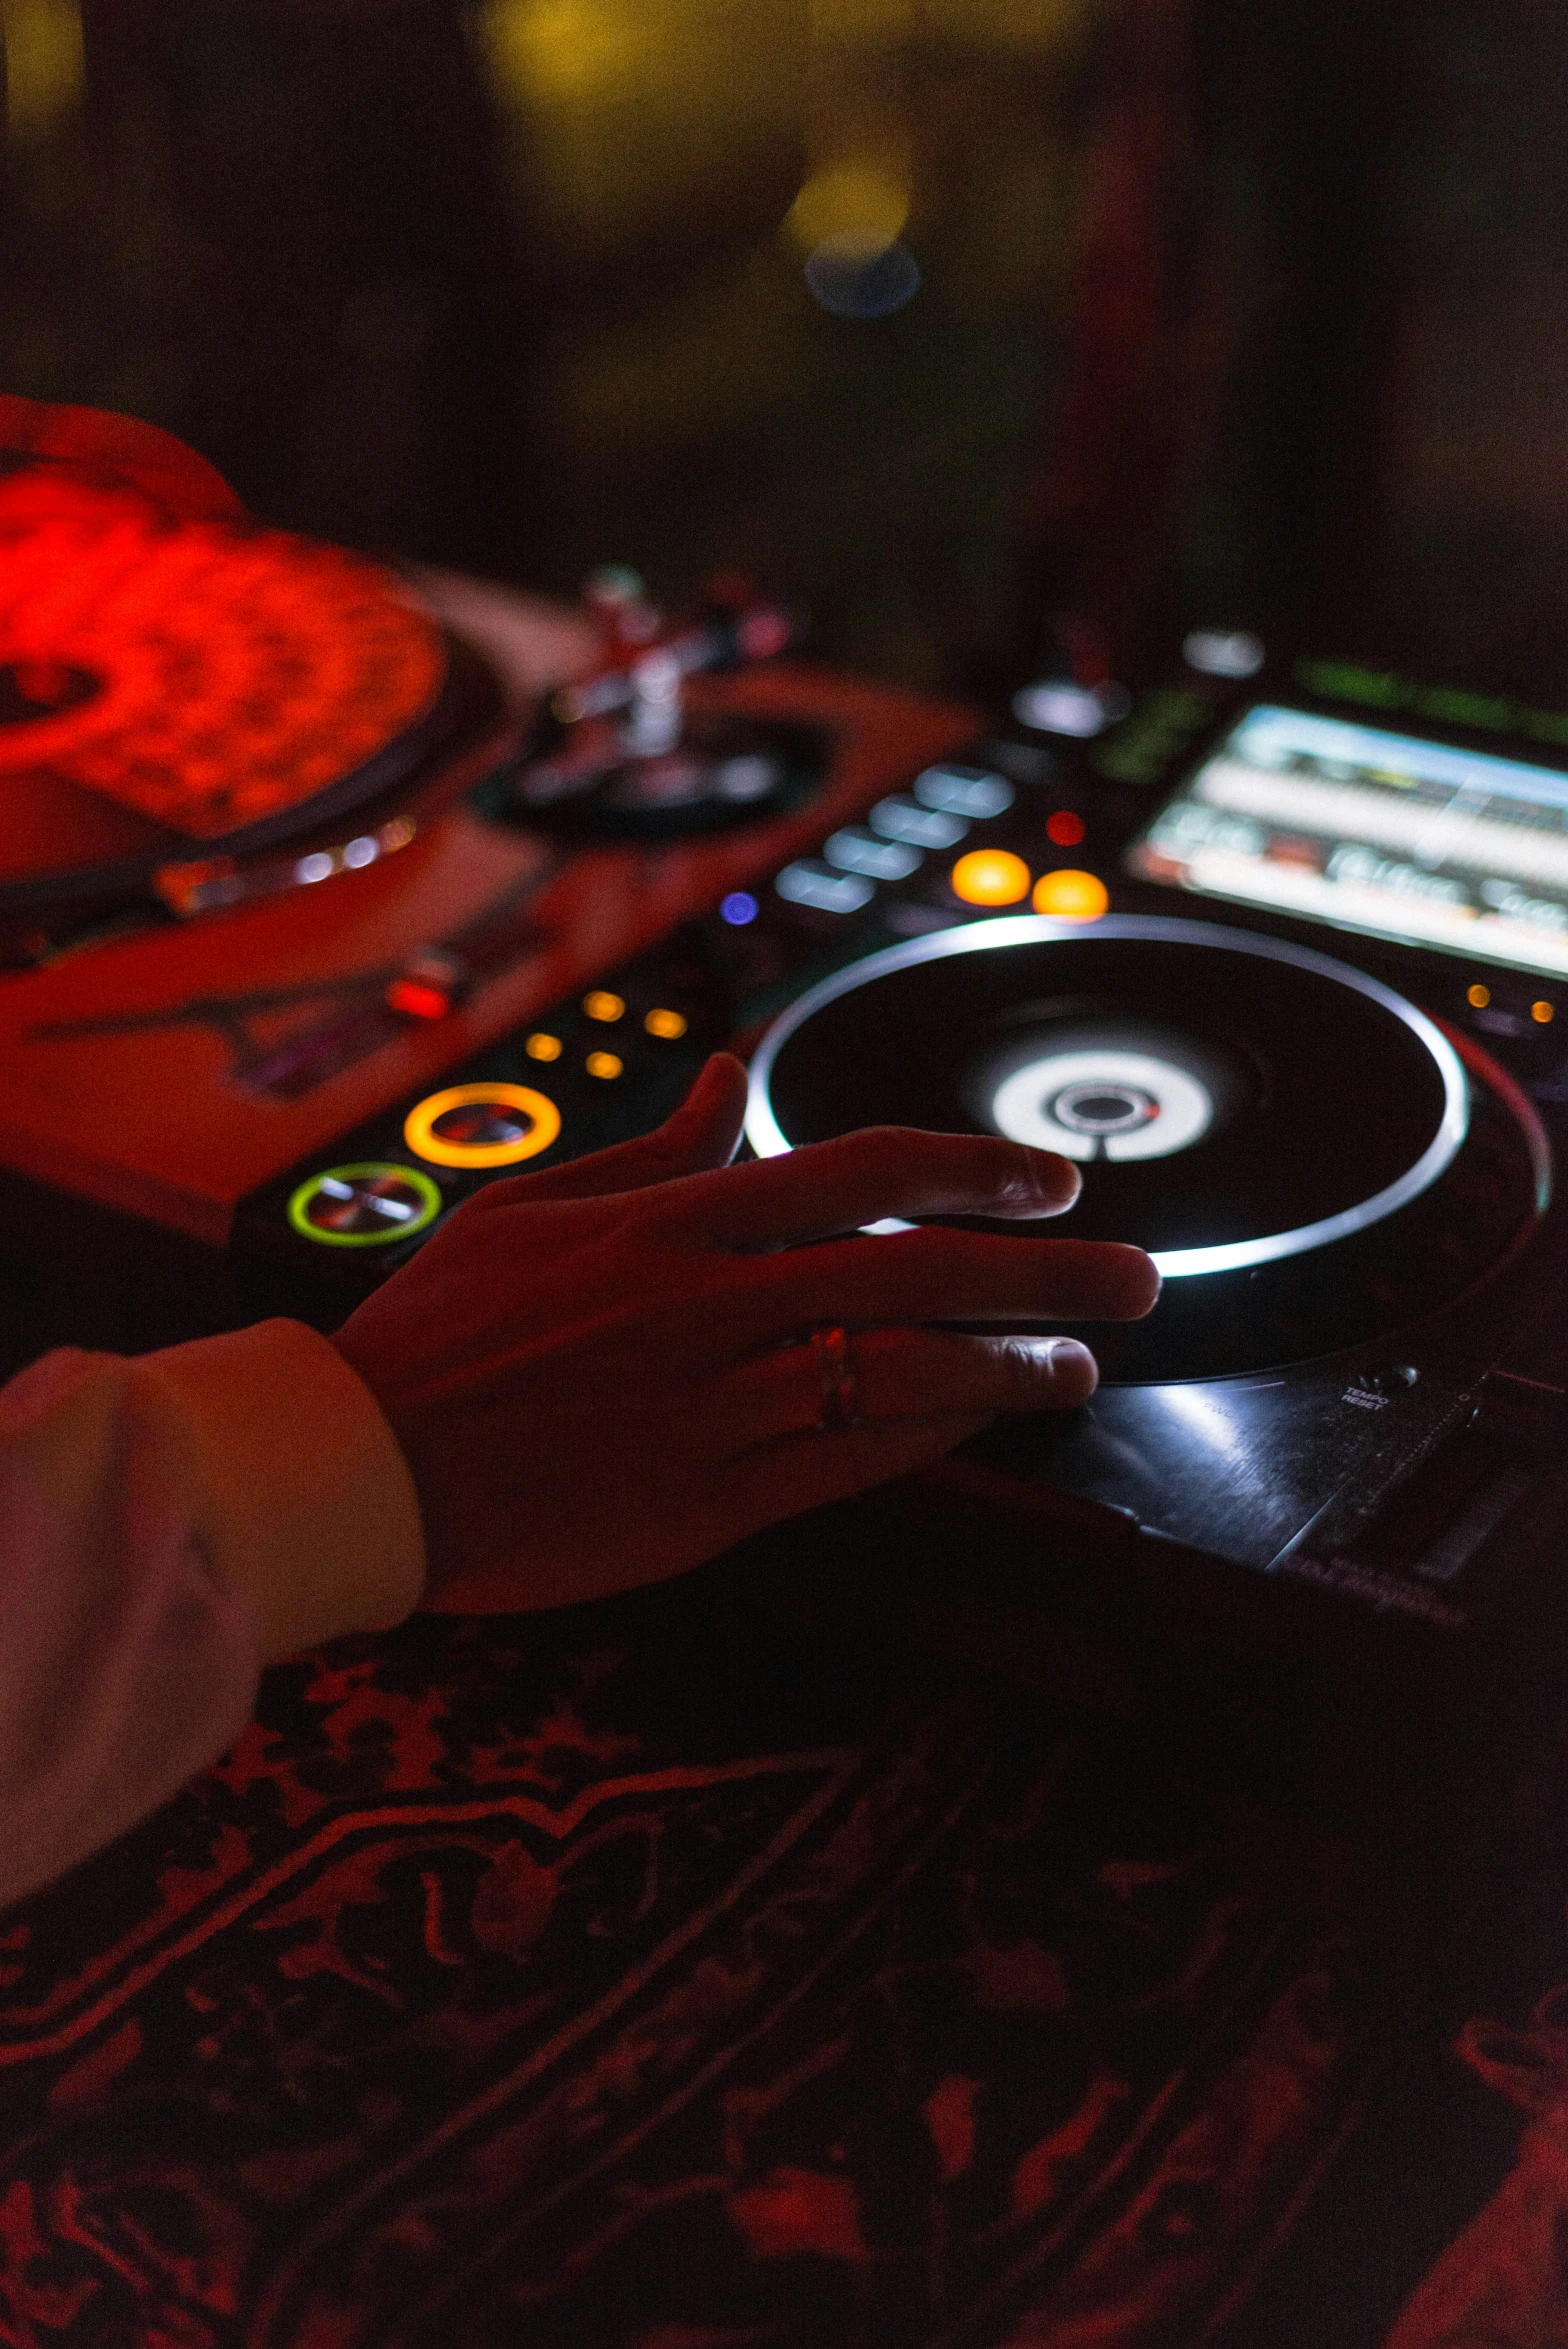 people use dj's controls on a black table in front of their recording equipment